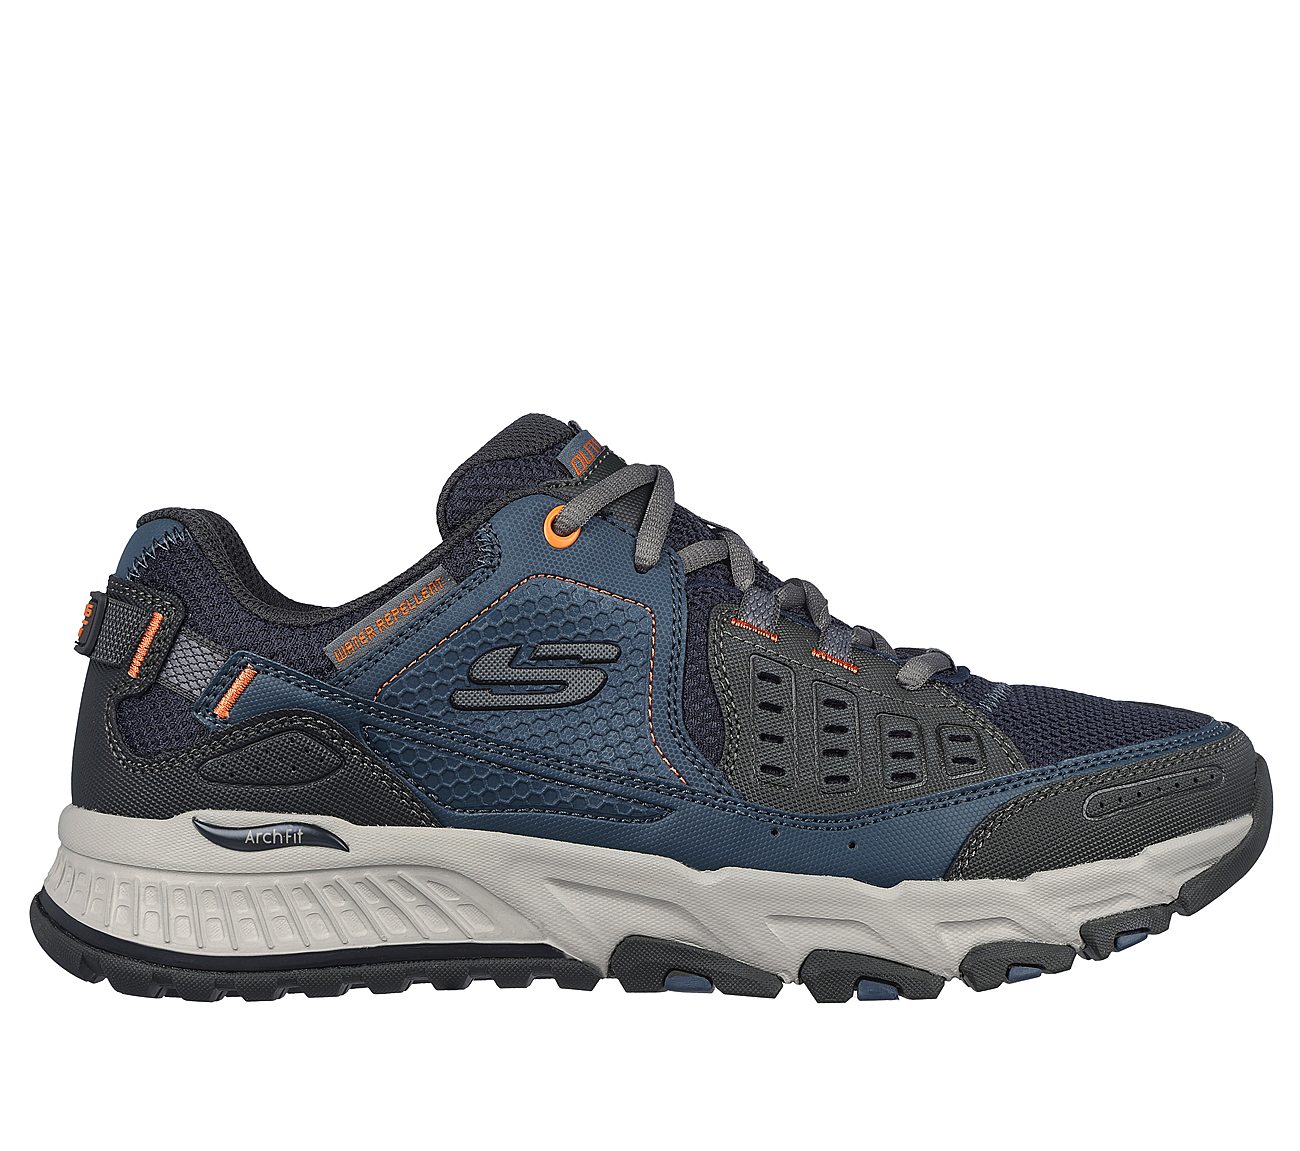 ARCH FIT ESCAPE PLAN, NAVY/ORANGE Footwear Lateral View